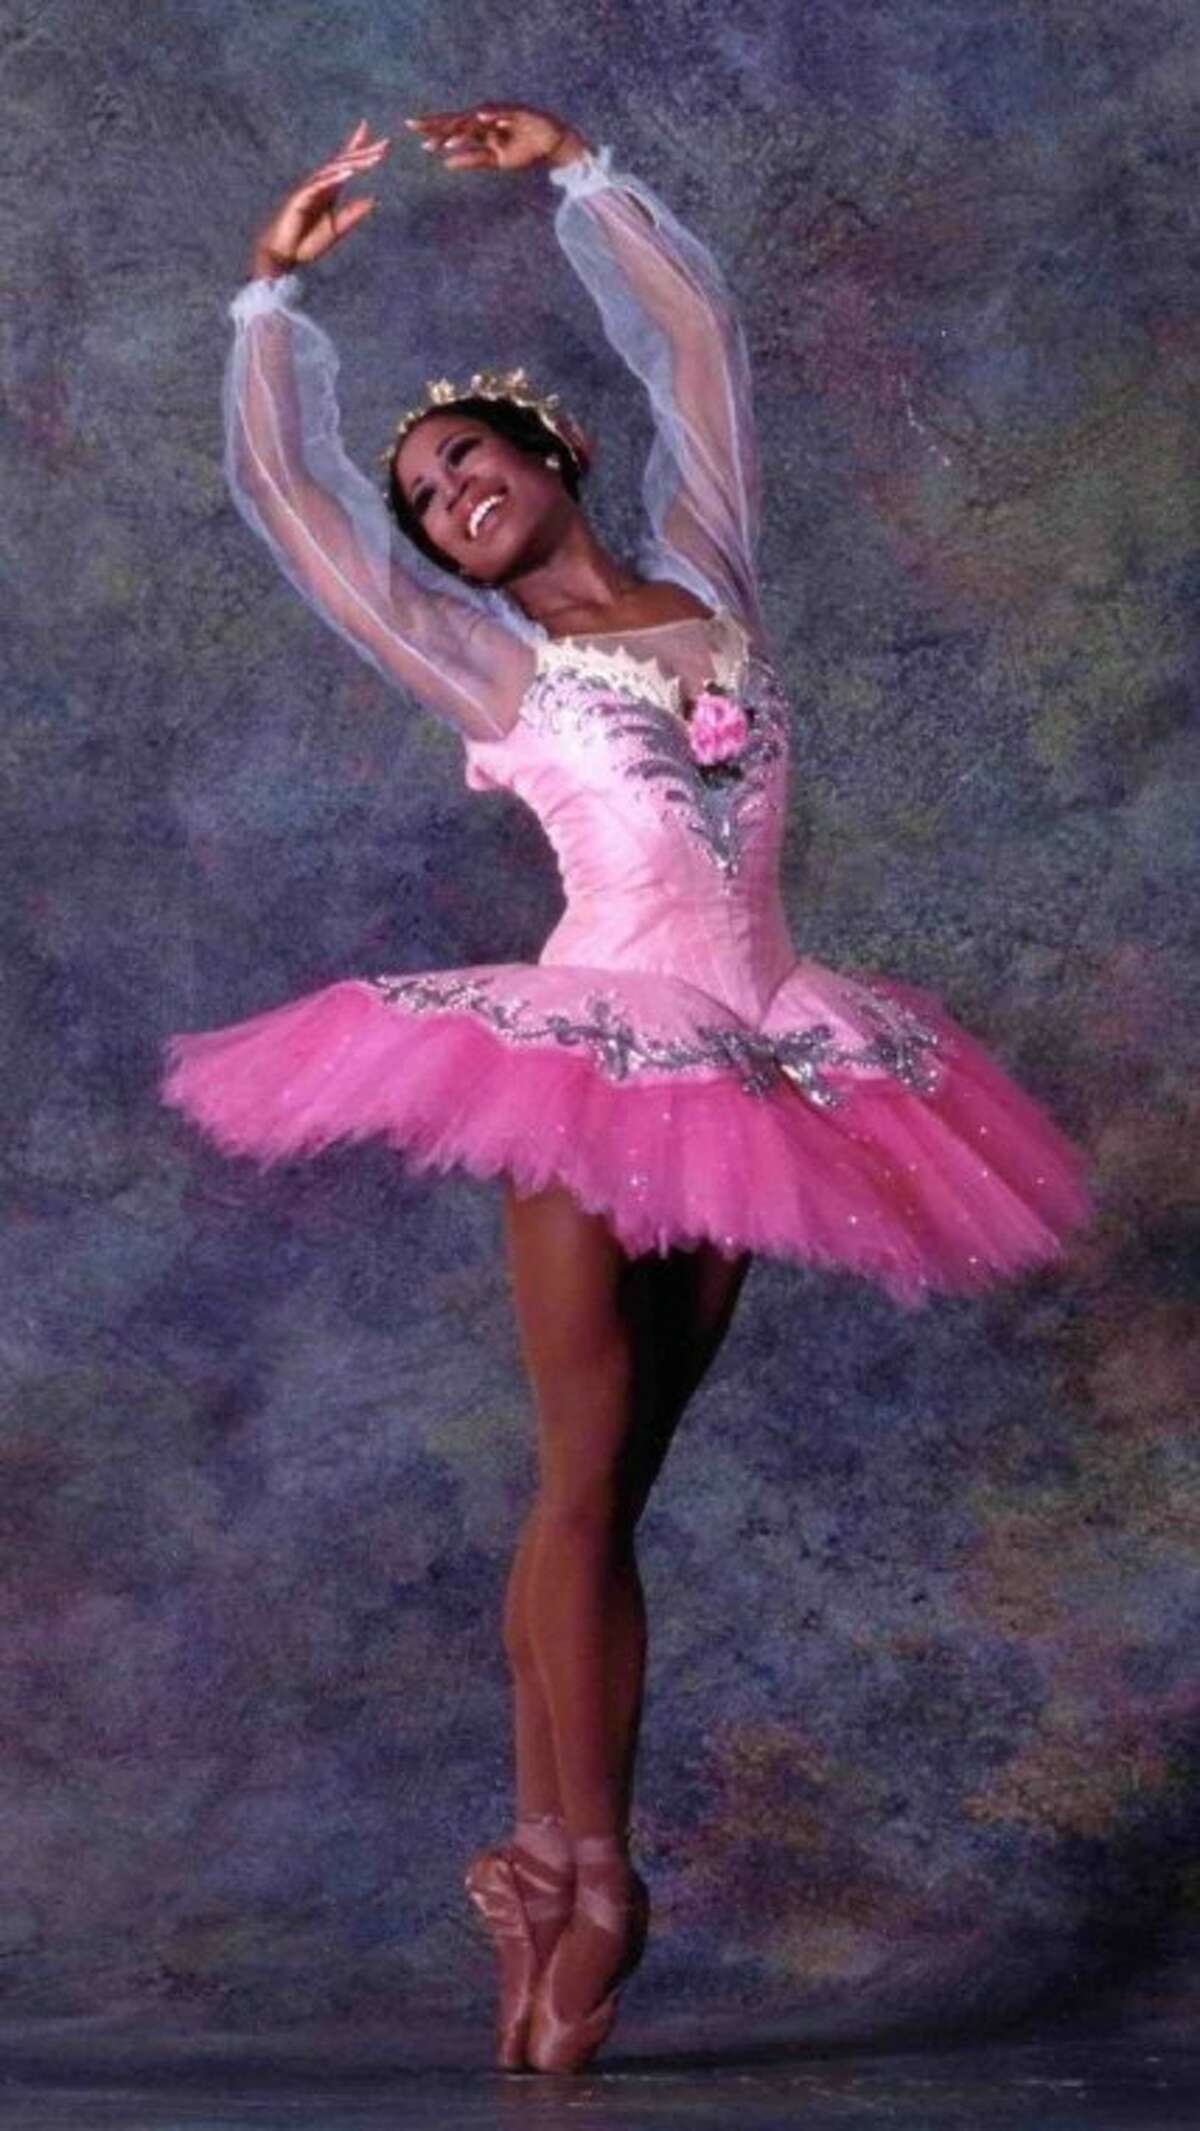 Houstonian Lauren Anderson enjoyed many years of success as a ballerina before turning to teaching dance as an education outreach associate for the Houston Ballet.